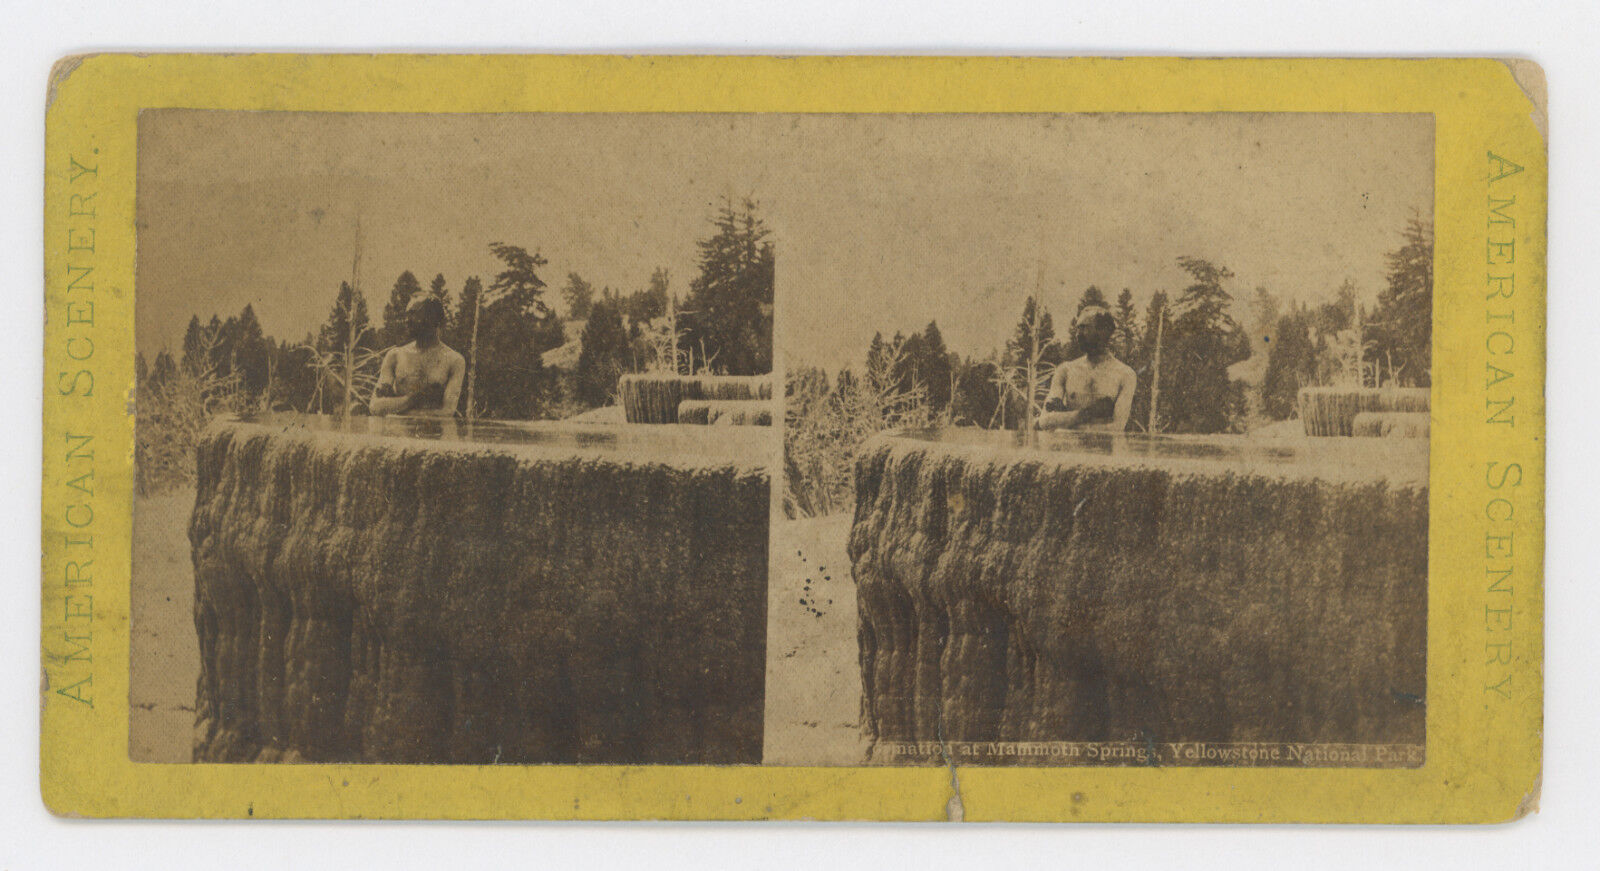 1900-1920 Formation at MAMMOTH SPRINGS Stereoview, YELLOWSTONE NATIONAL PARK